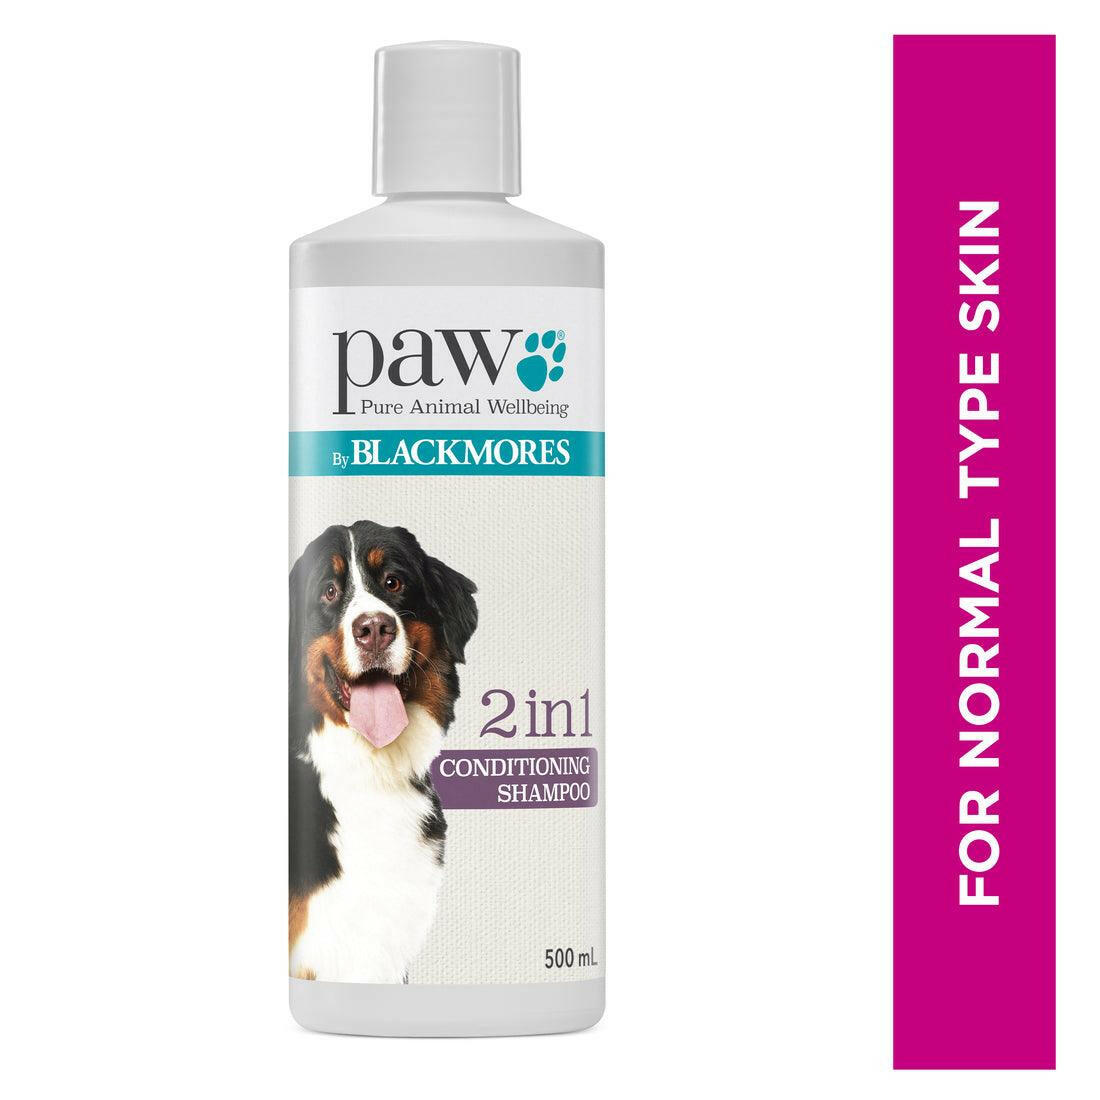 Blackmores PAW 2 in 1 - Gentle & Nourishing Dog Shampoo and Conditioner, 500ml PAWS CLUB